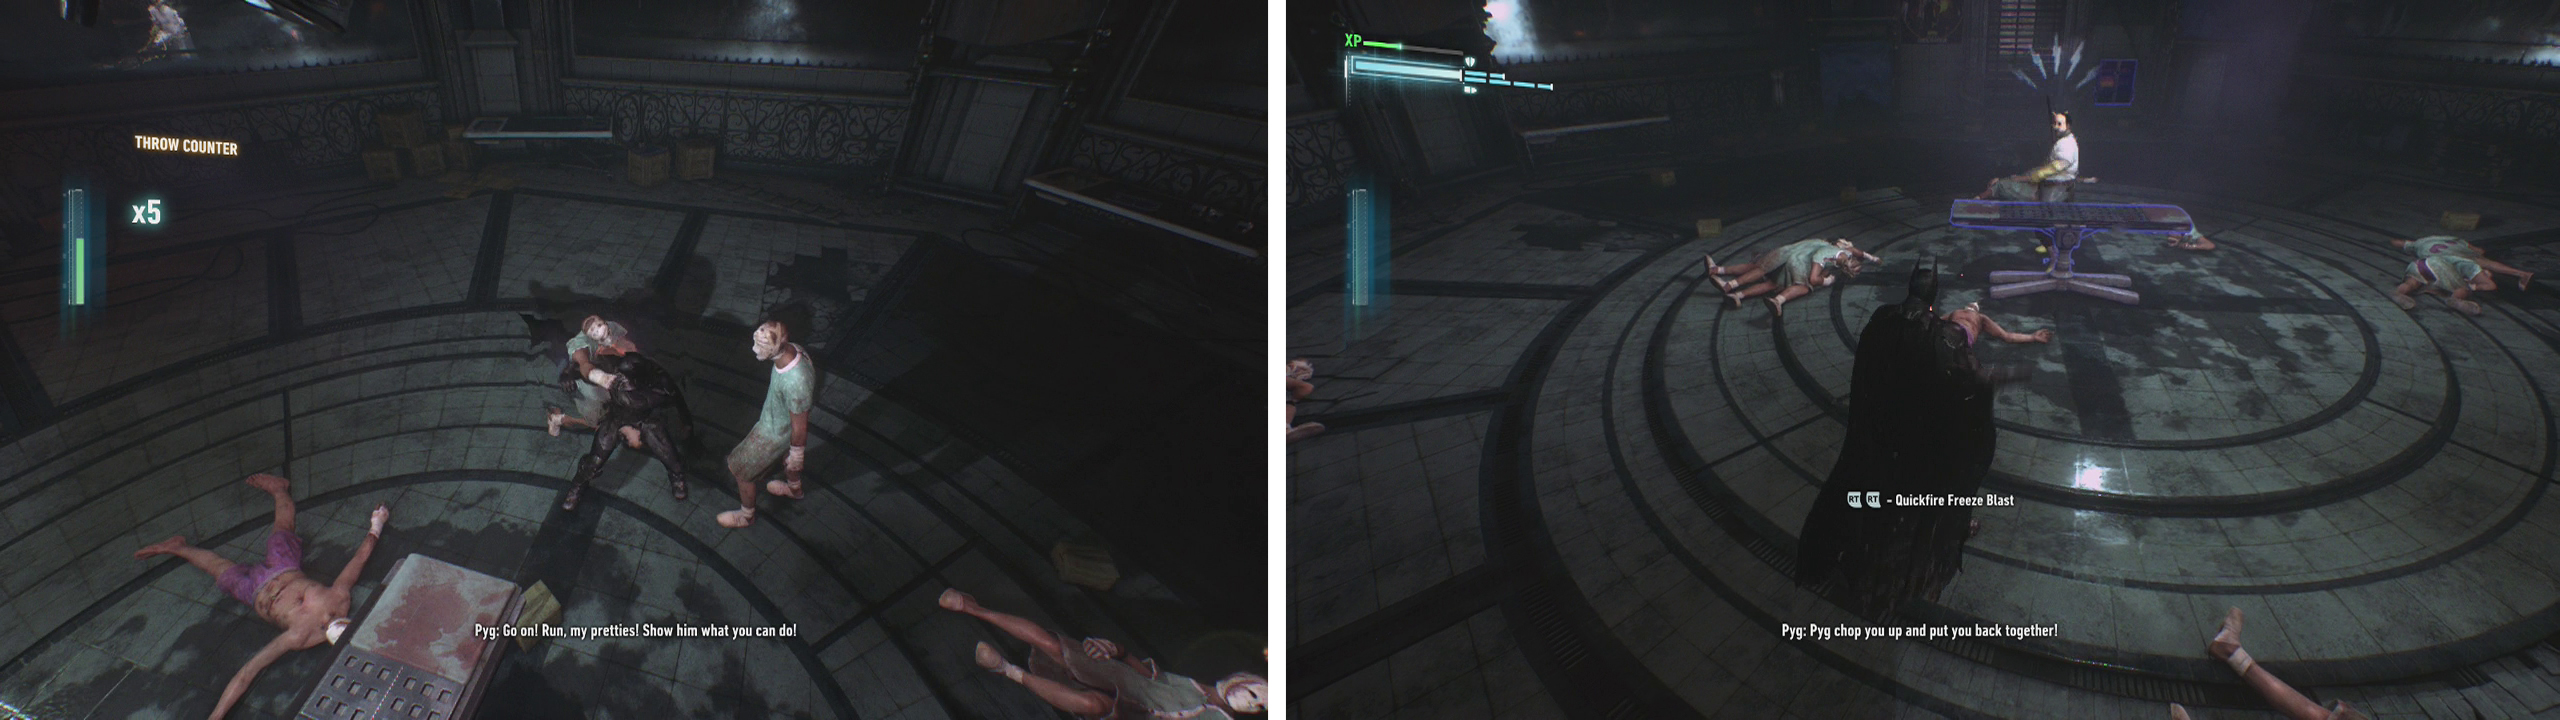 Defeat the Dollotrons (left) before focusing on the boss. Counter the throwing knives (right).